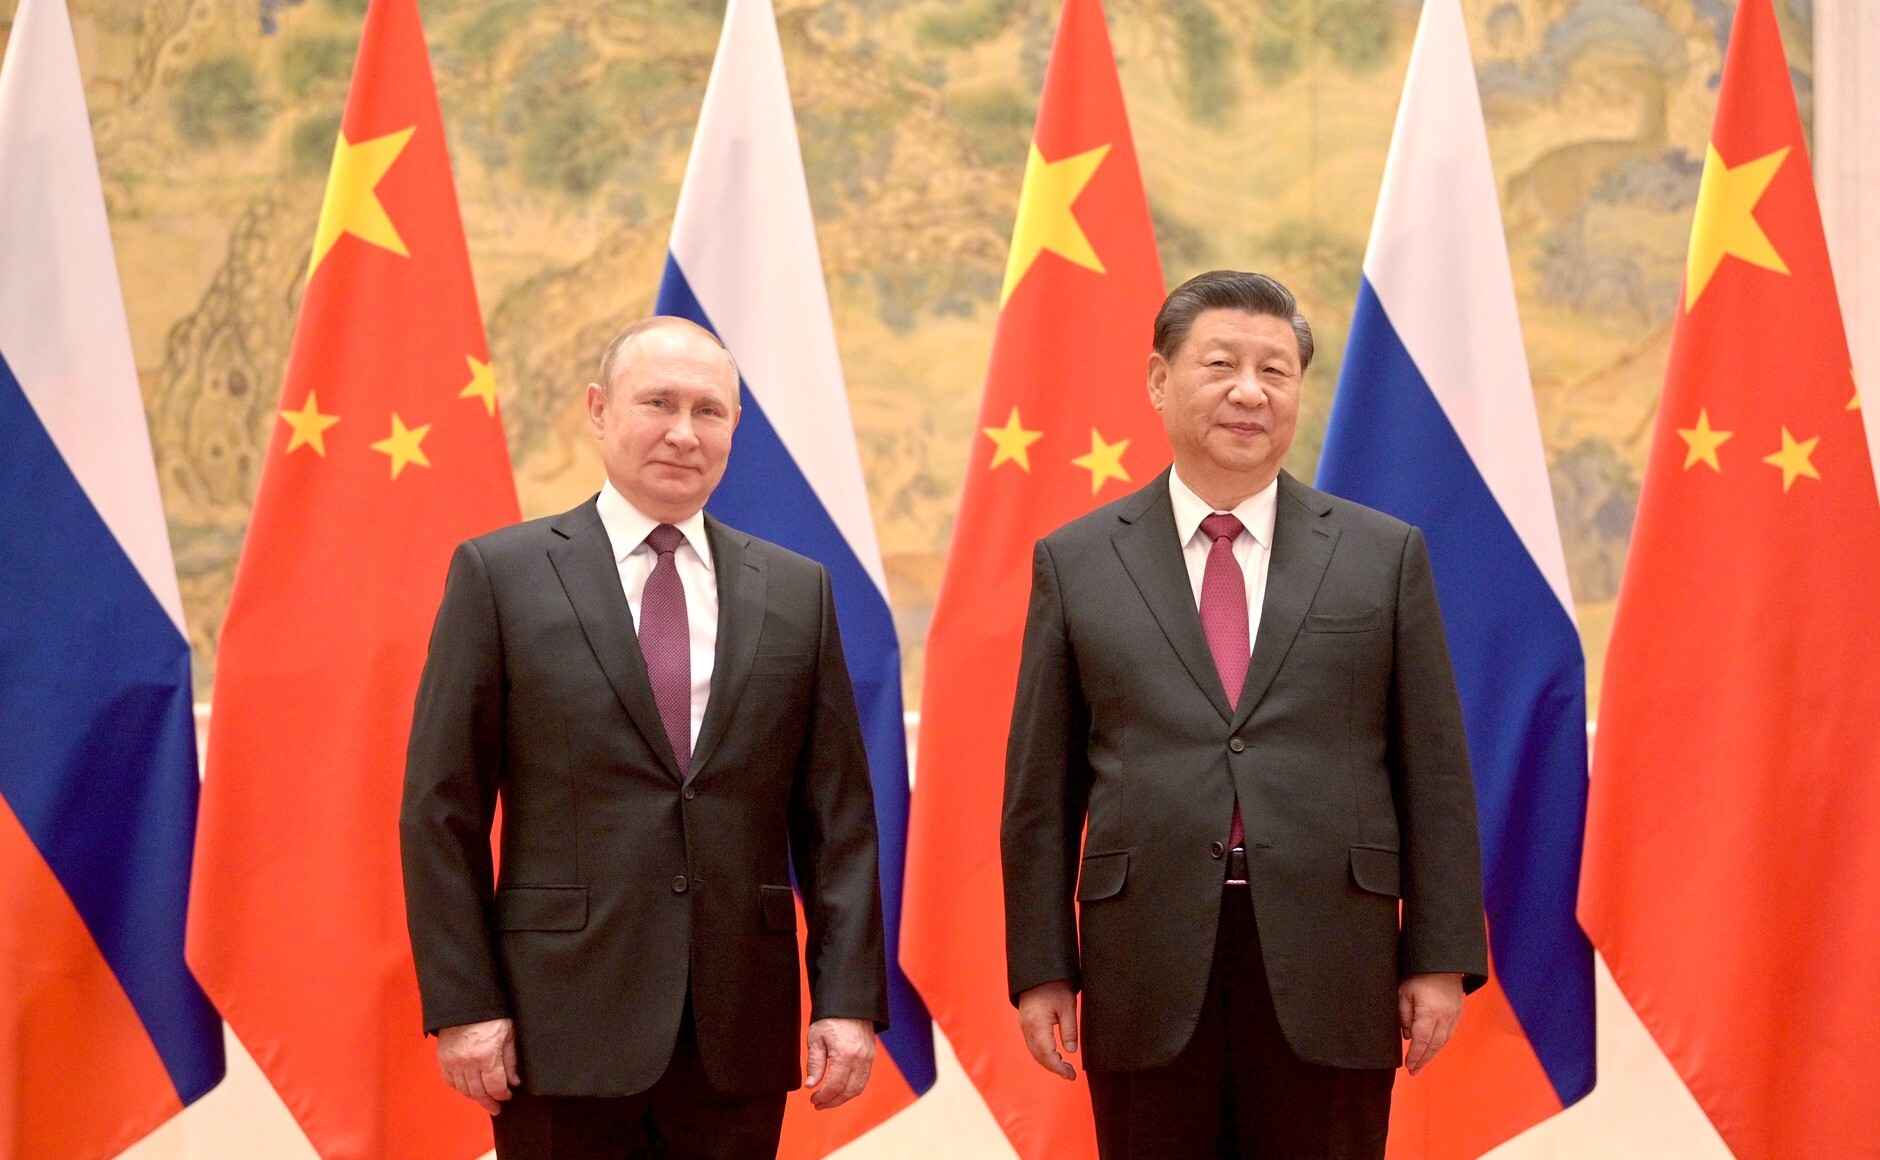 Russian President Vladimir Putin, left, and Chinese President Xi Jinping meet in Beijing, China on February 4.